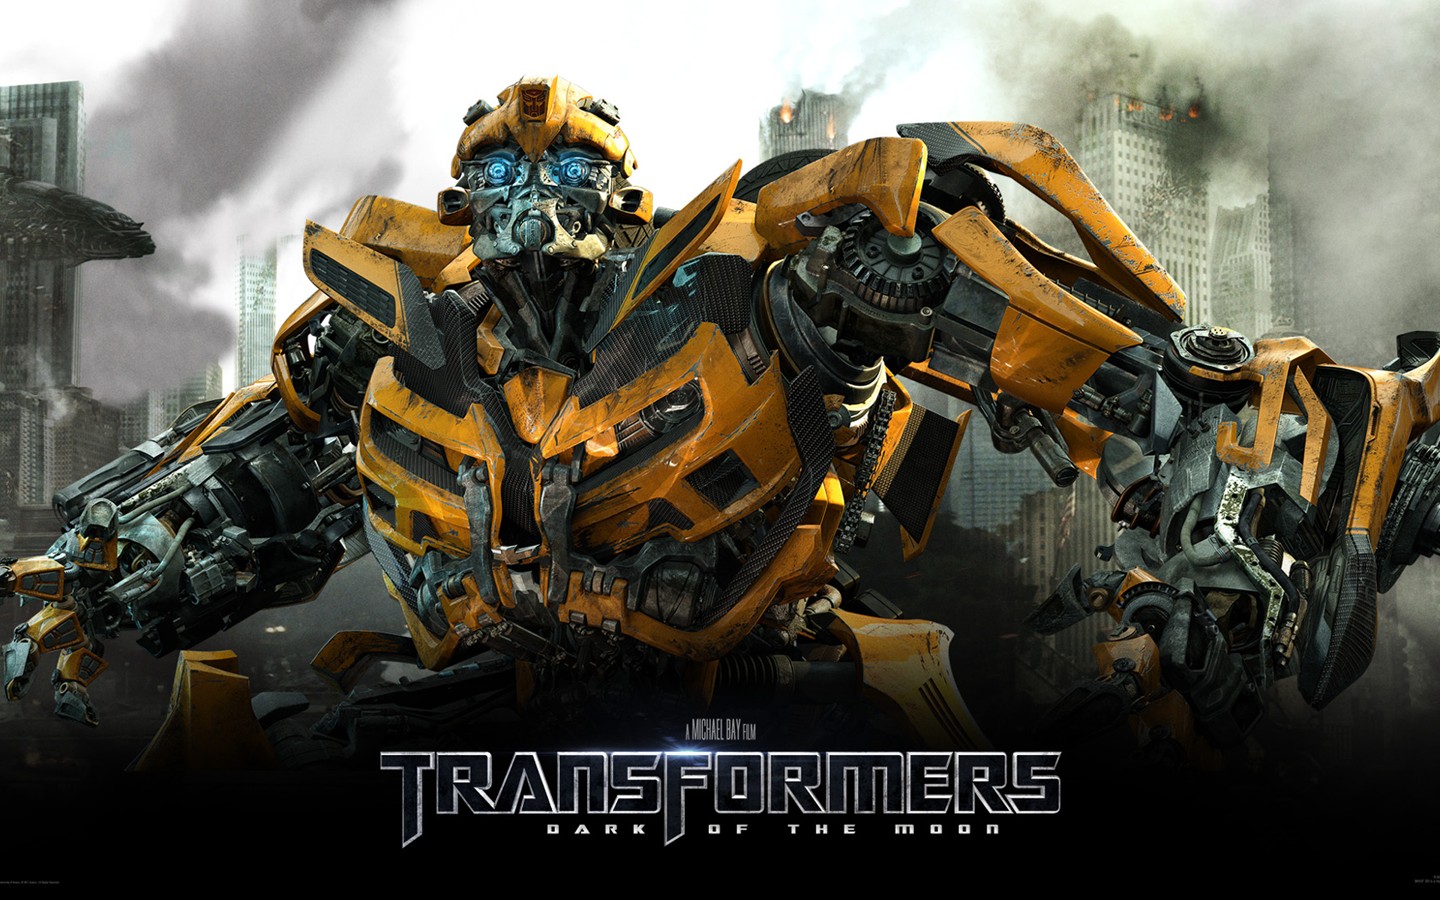 Transformers, when on the black 29696 - Movie Wallpapers ...